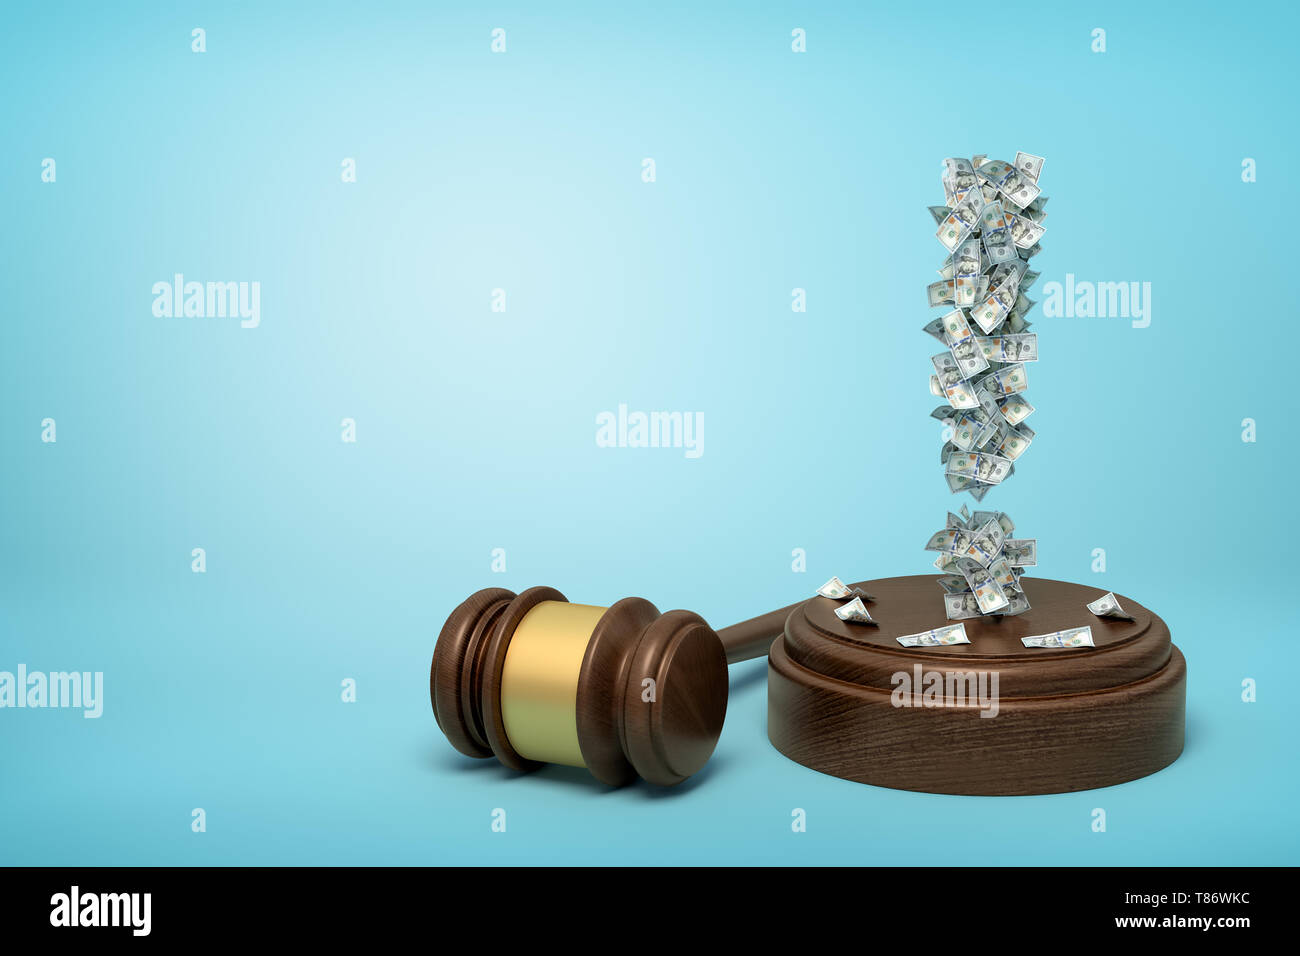 3d rendering of exclamation mark formed with dollar banknotes standing on sounding block with gavel beside on blue background with copy space. Stock Photo